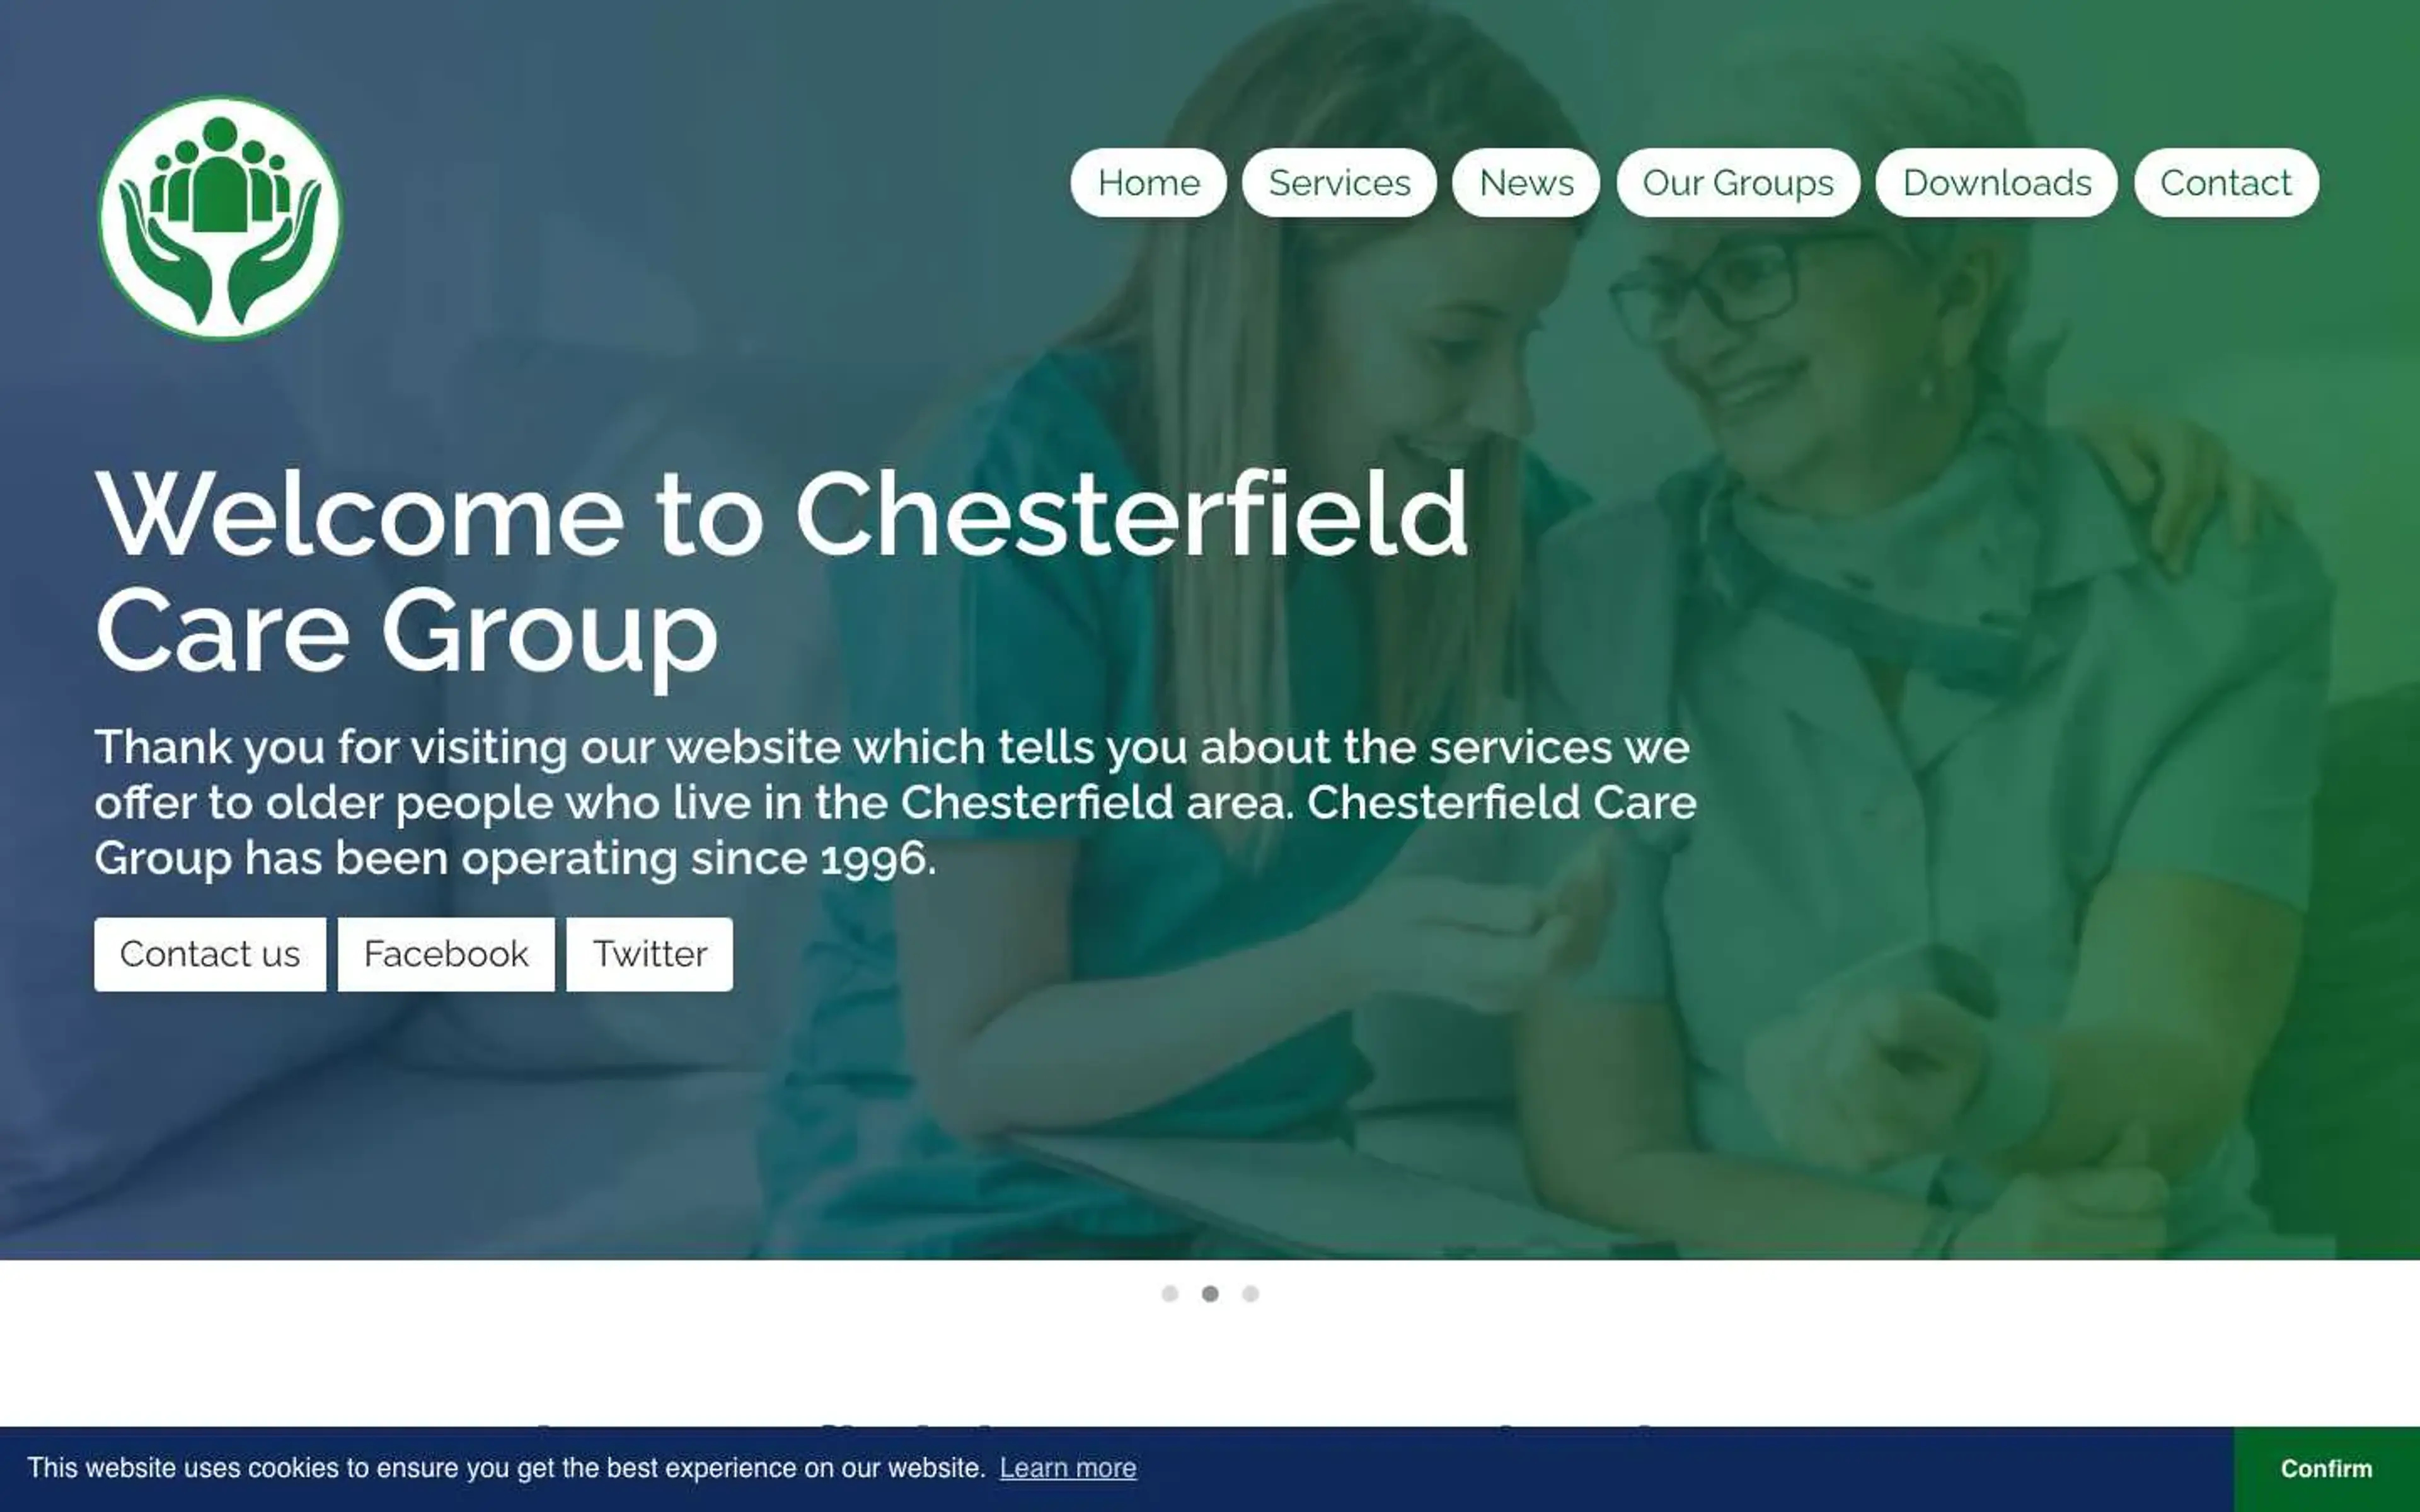 Recent project we worked on for Chesterfield Care Group